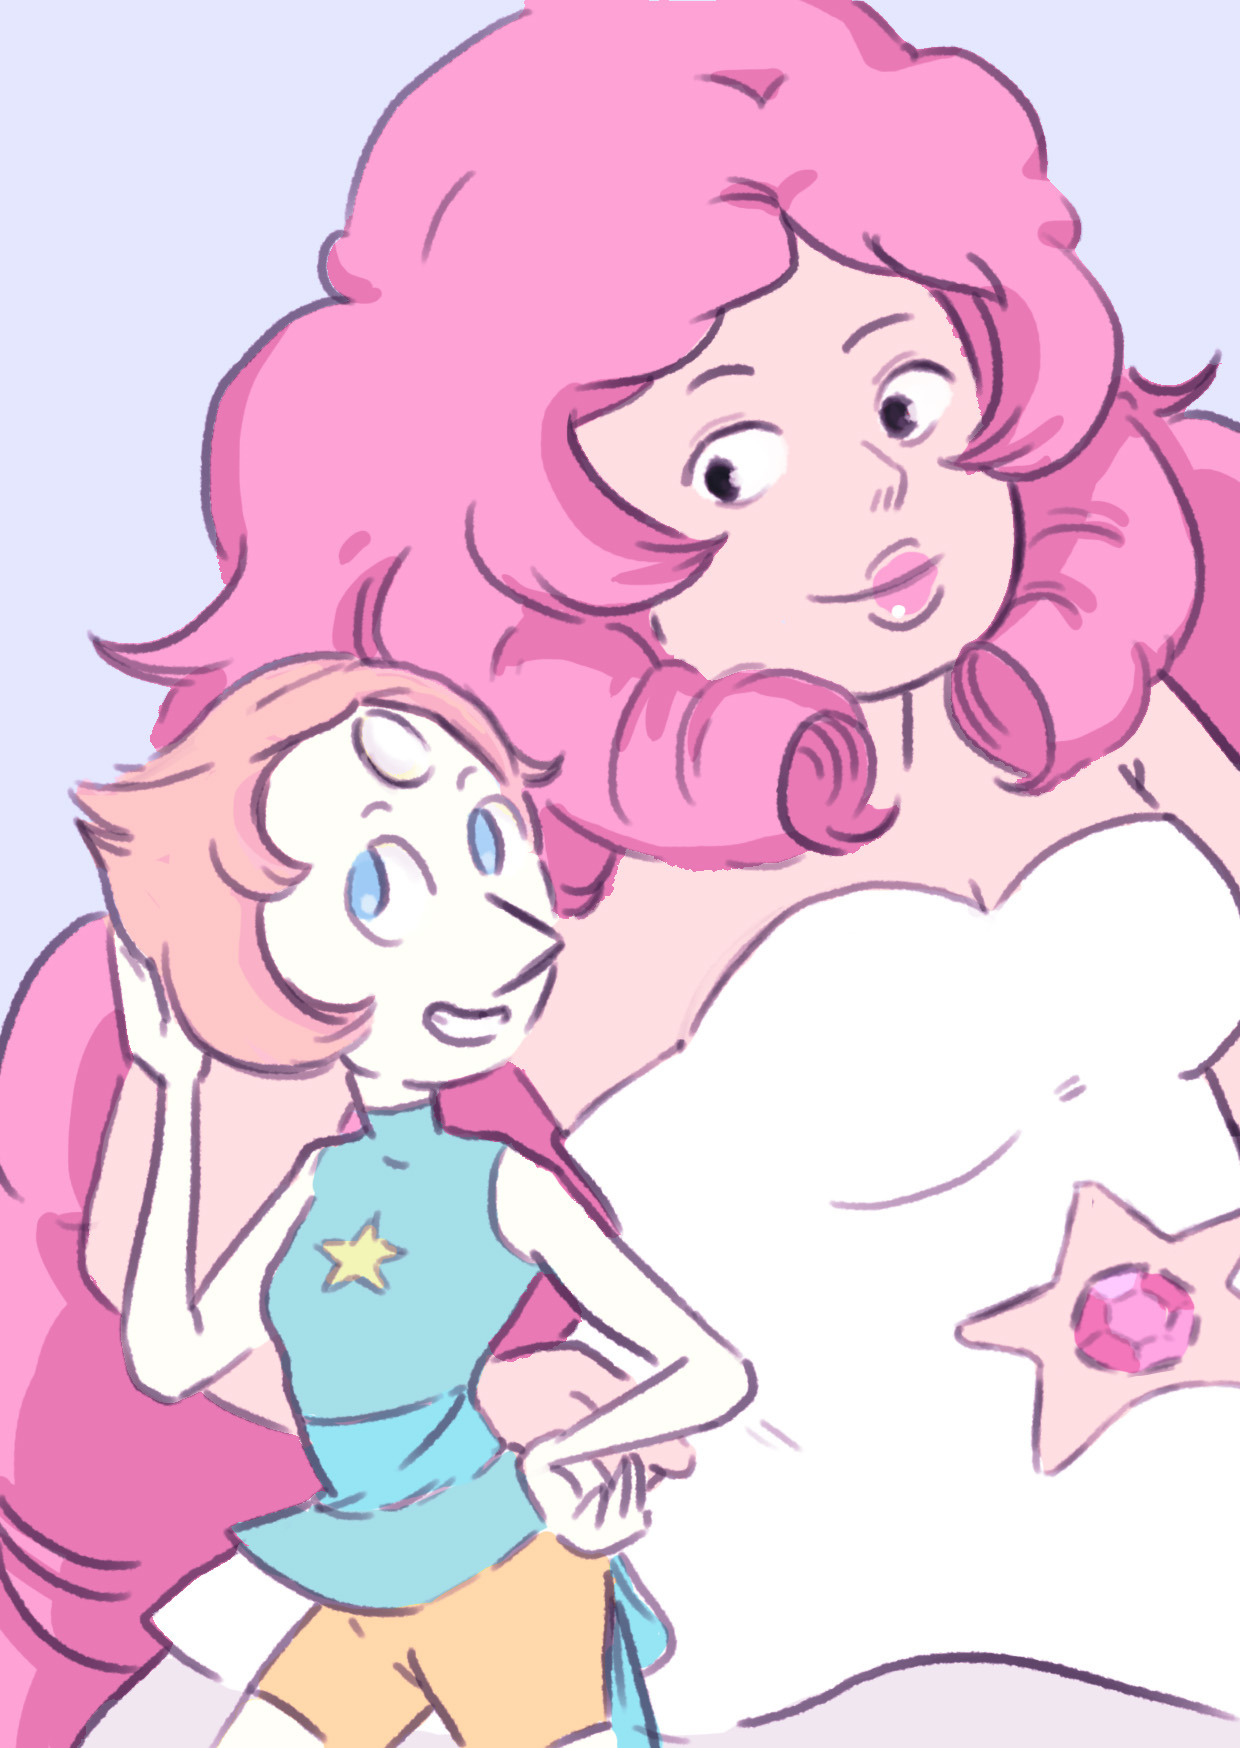 ~PEARL AND ROSE FANART~